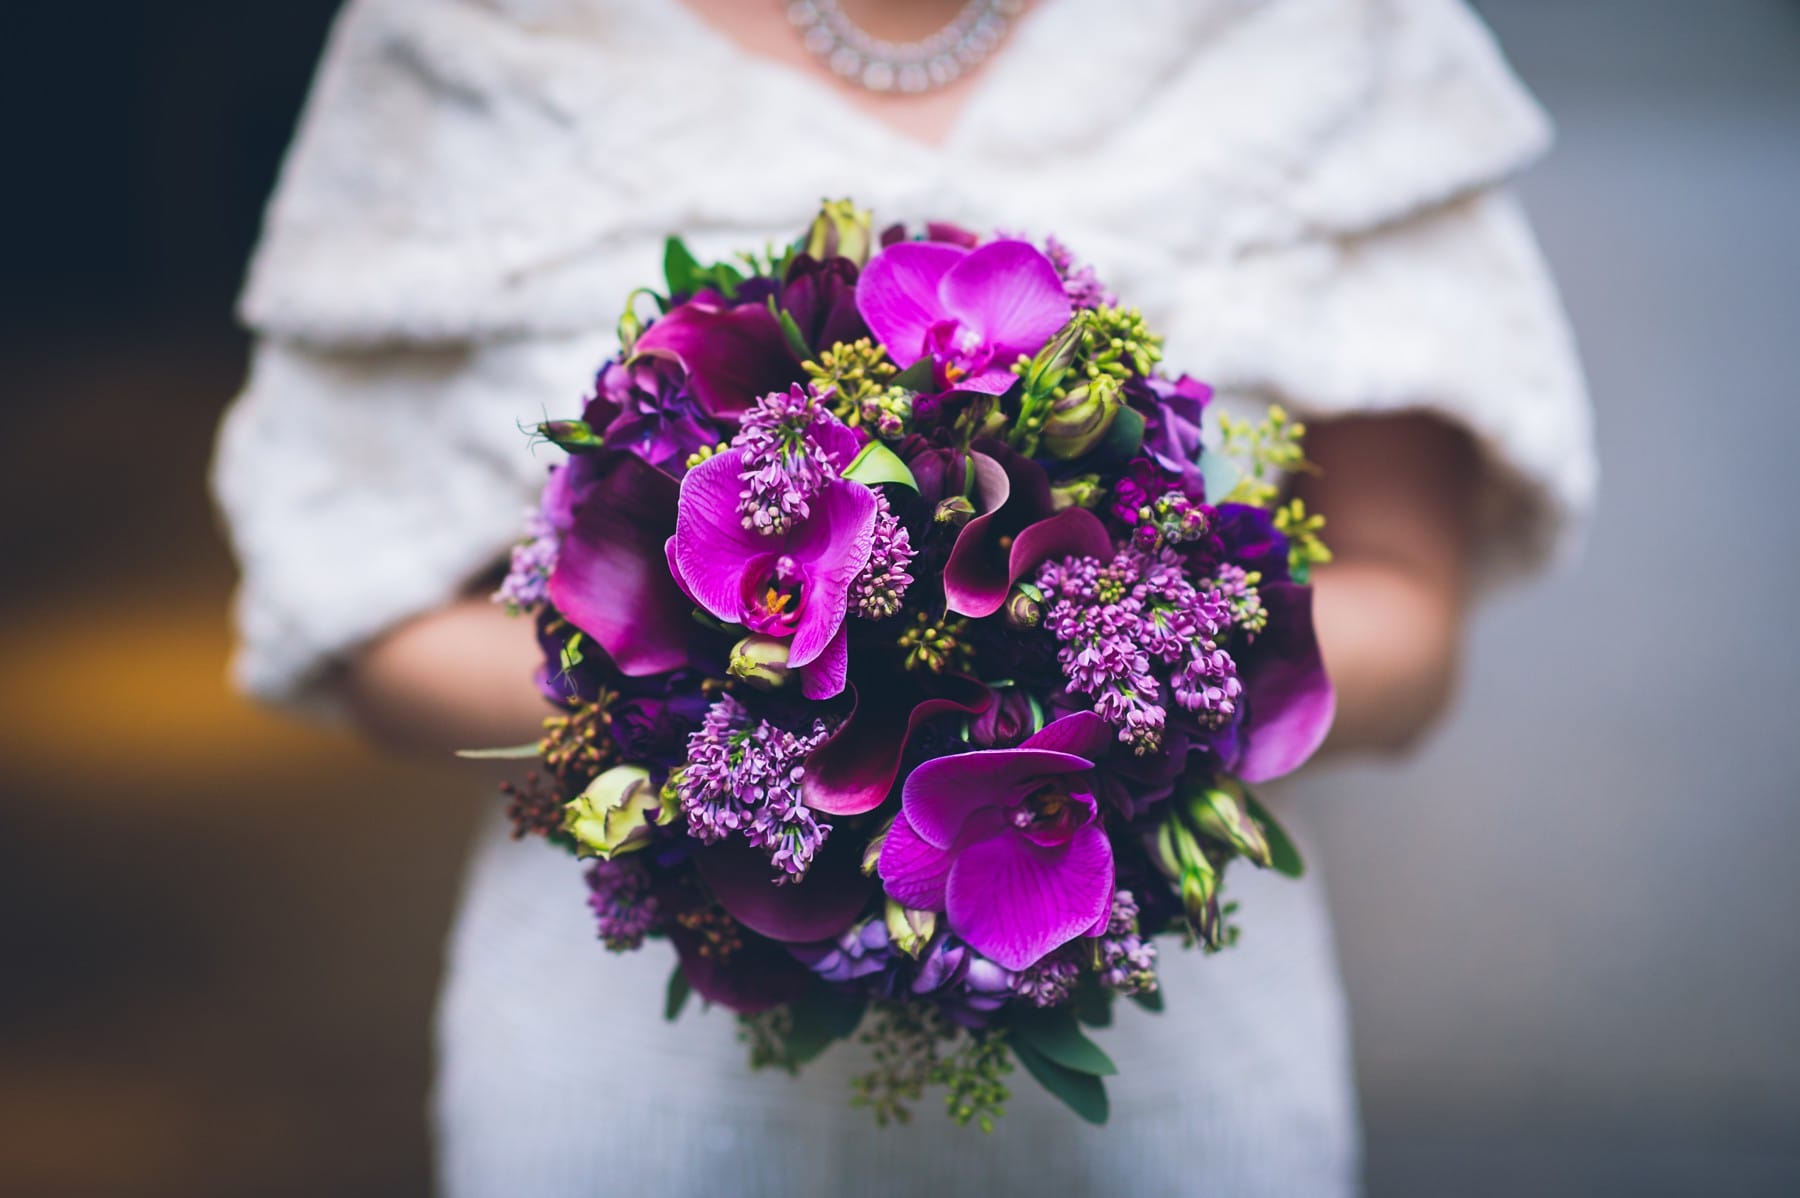 Gorgeous wedding flowers by Starbright Floral Design 